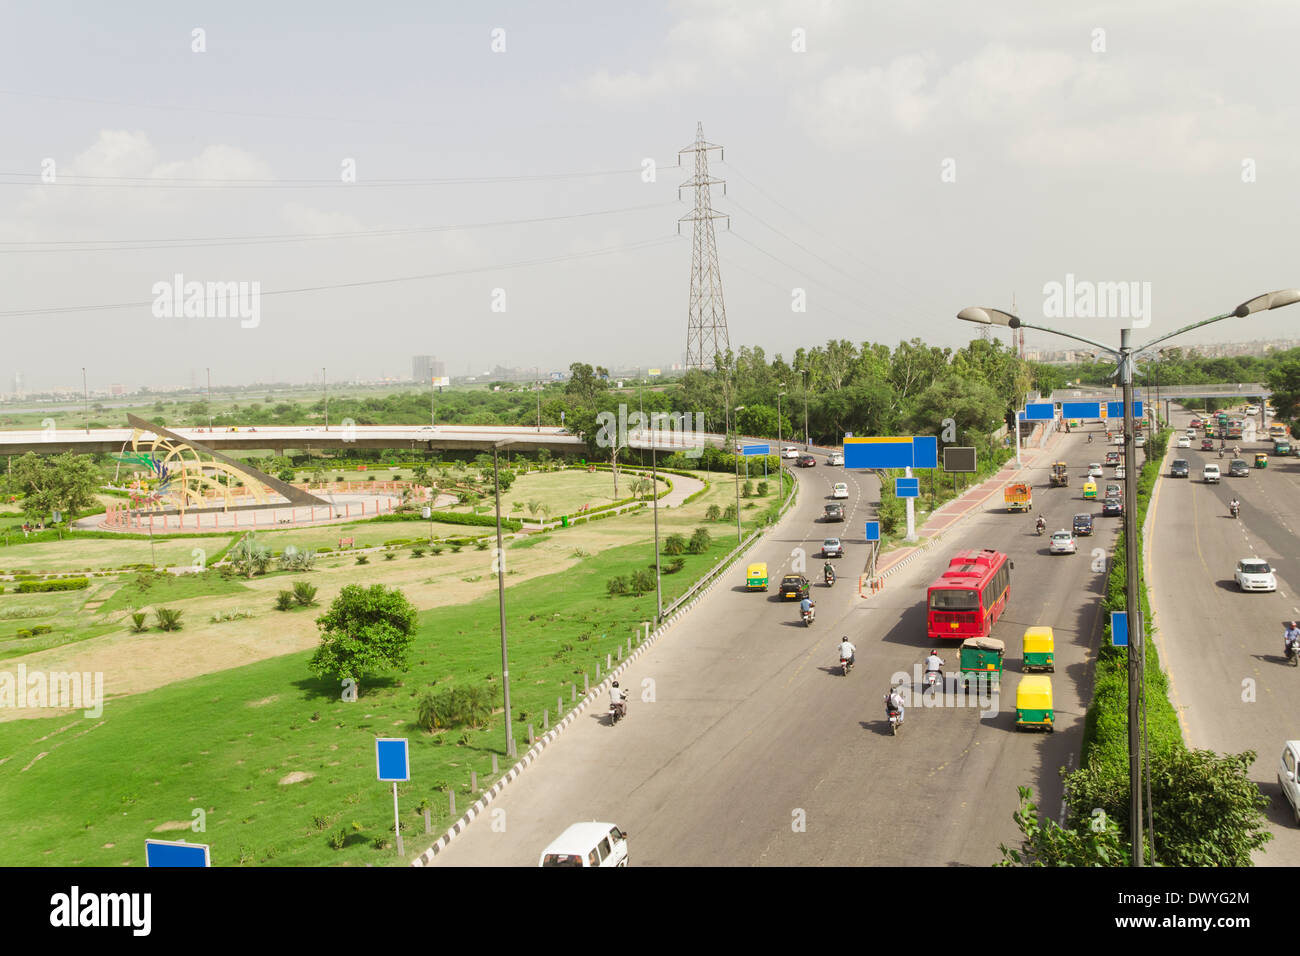 Indian Traffic on Road, Traffic on Highway, Elevated view of traffic, Traffic. Road side, Car, Auto, Bike, Transportations, Stock Photo